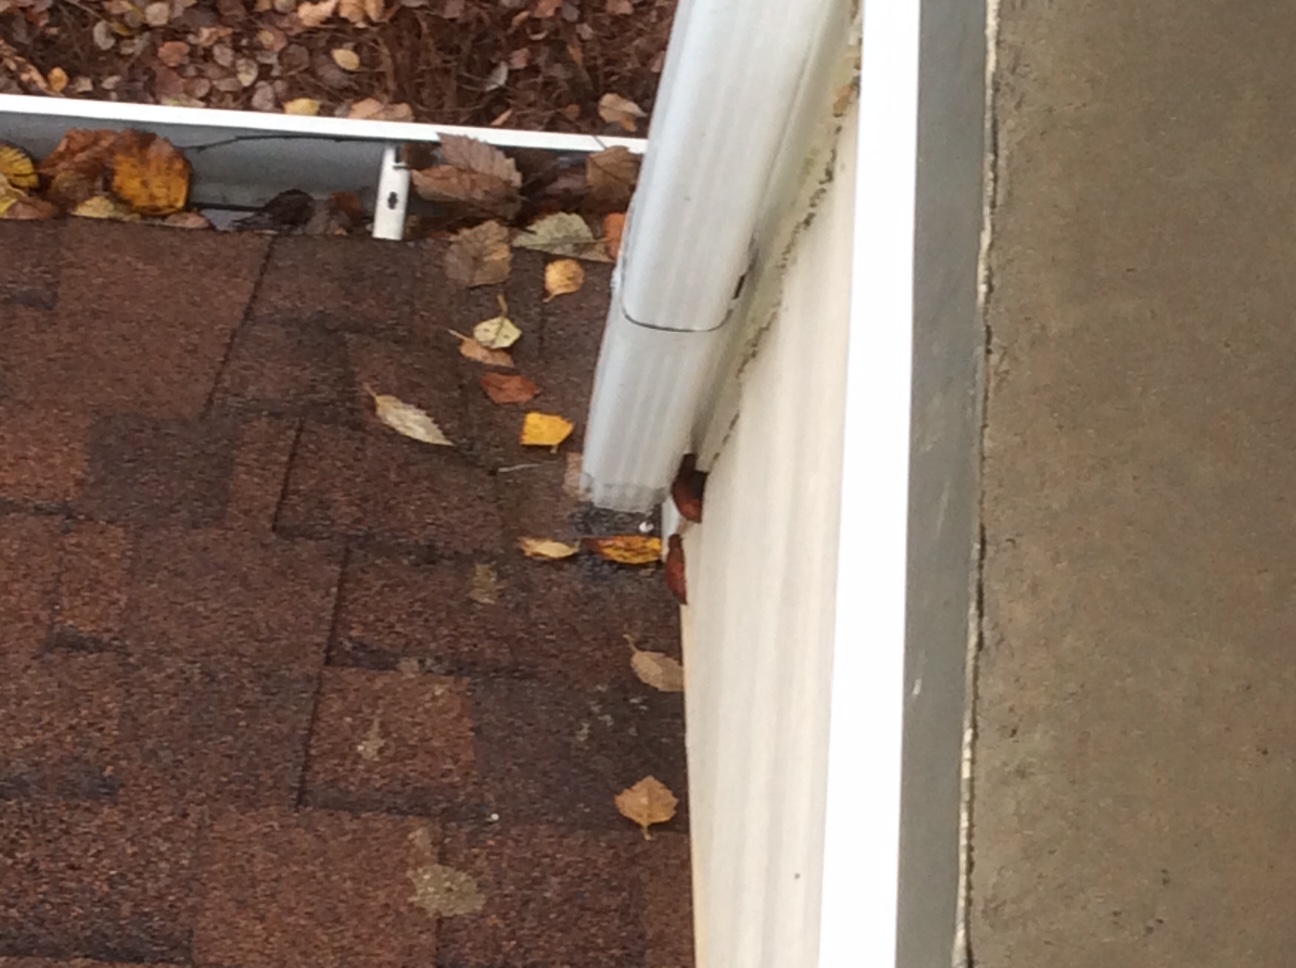 Rotten wood that needs to be replaced where the downspout comes out